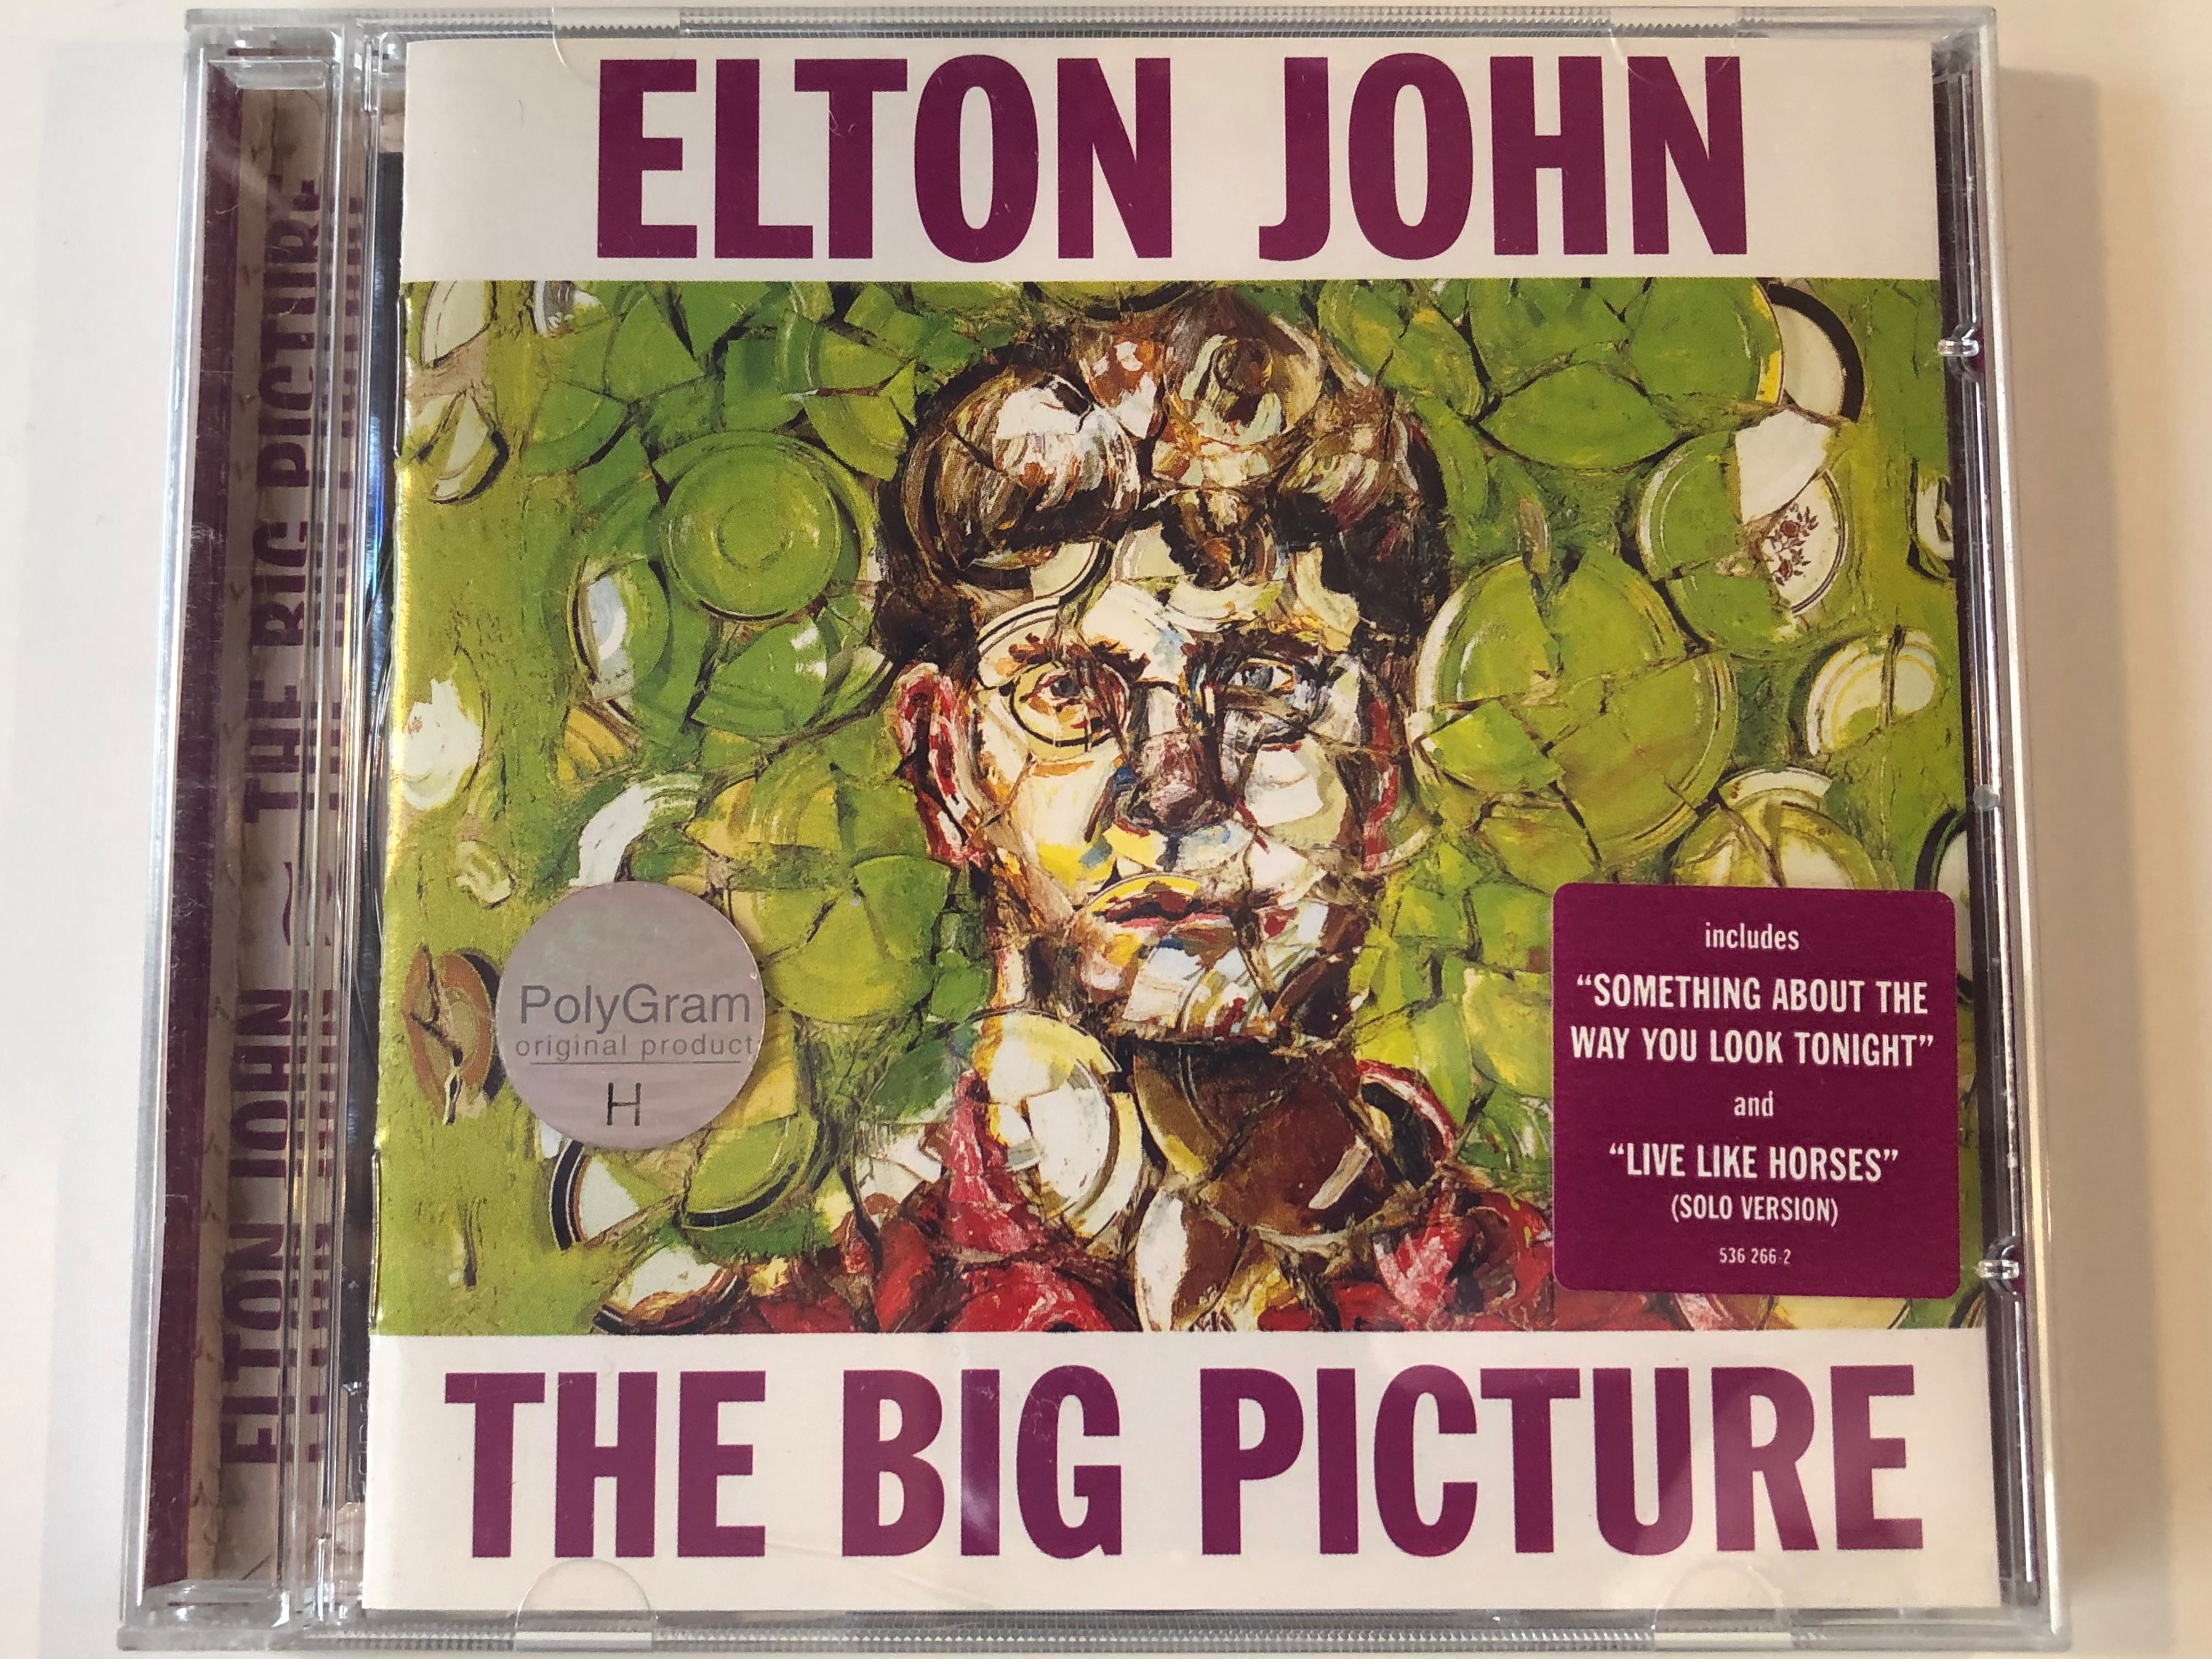 elton-john-the-big-picture-includes-something-about-the-way-you-look-tonight-and-live-like-horses-solo-version-mercury-audio-cd-1997-536-266-2-1-.jpg